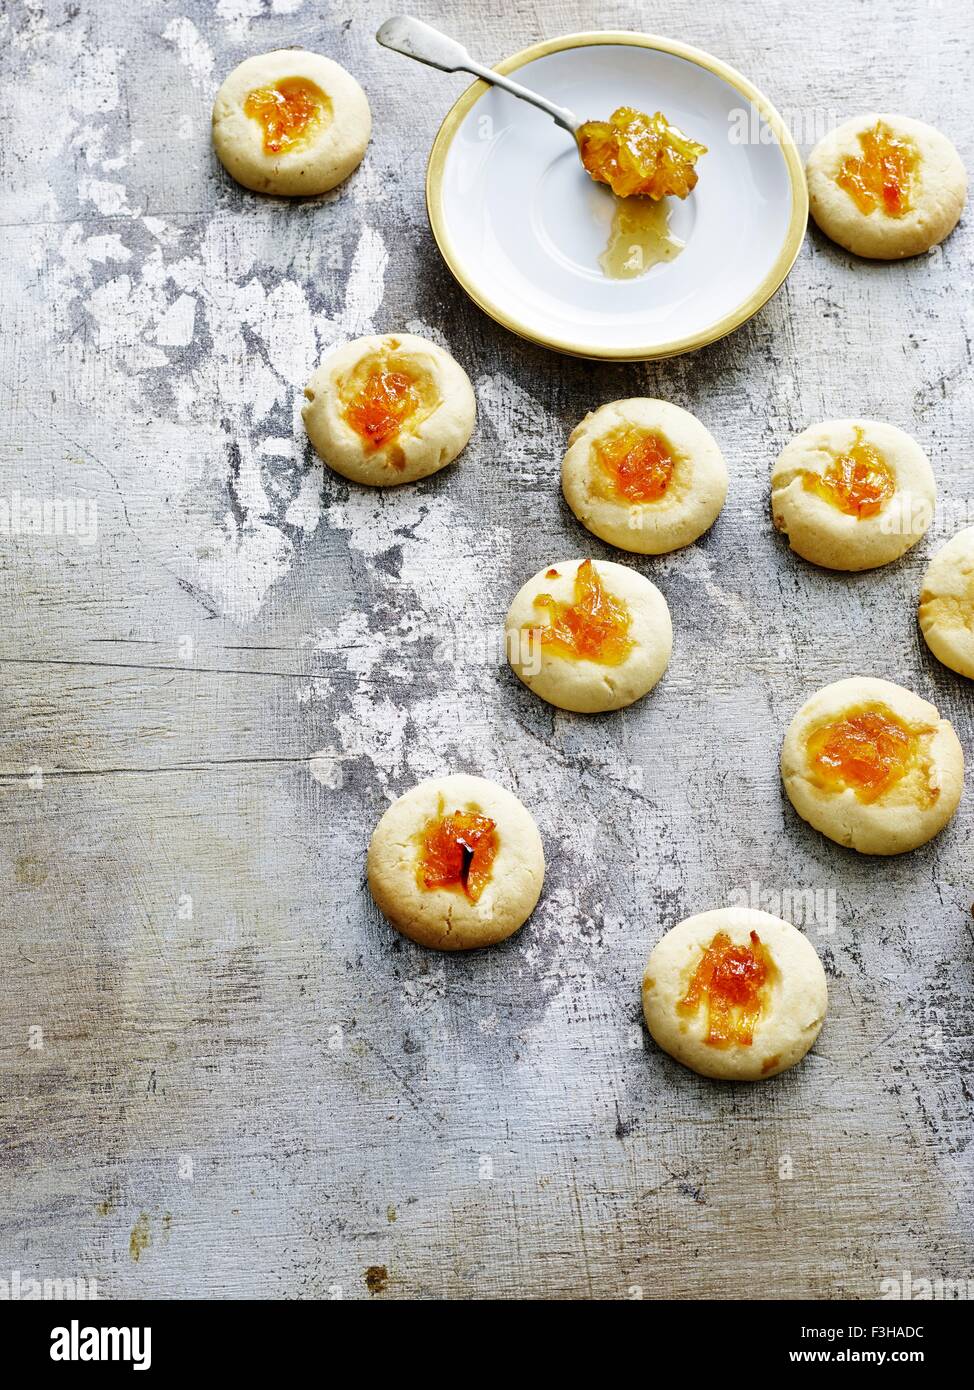 Overhead view of thumbprint cookies and spoonful of marmalade Stock Photo